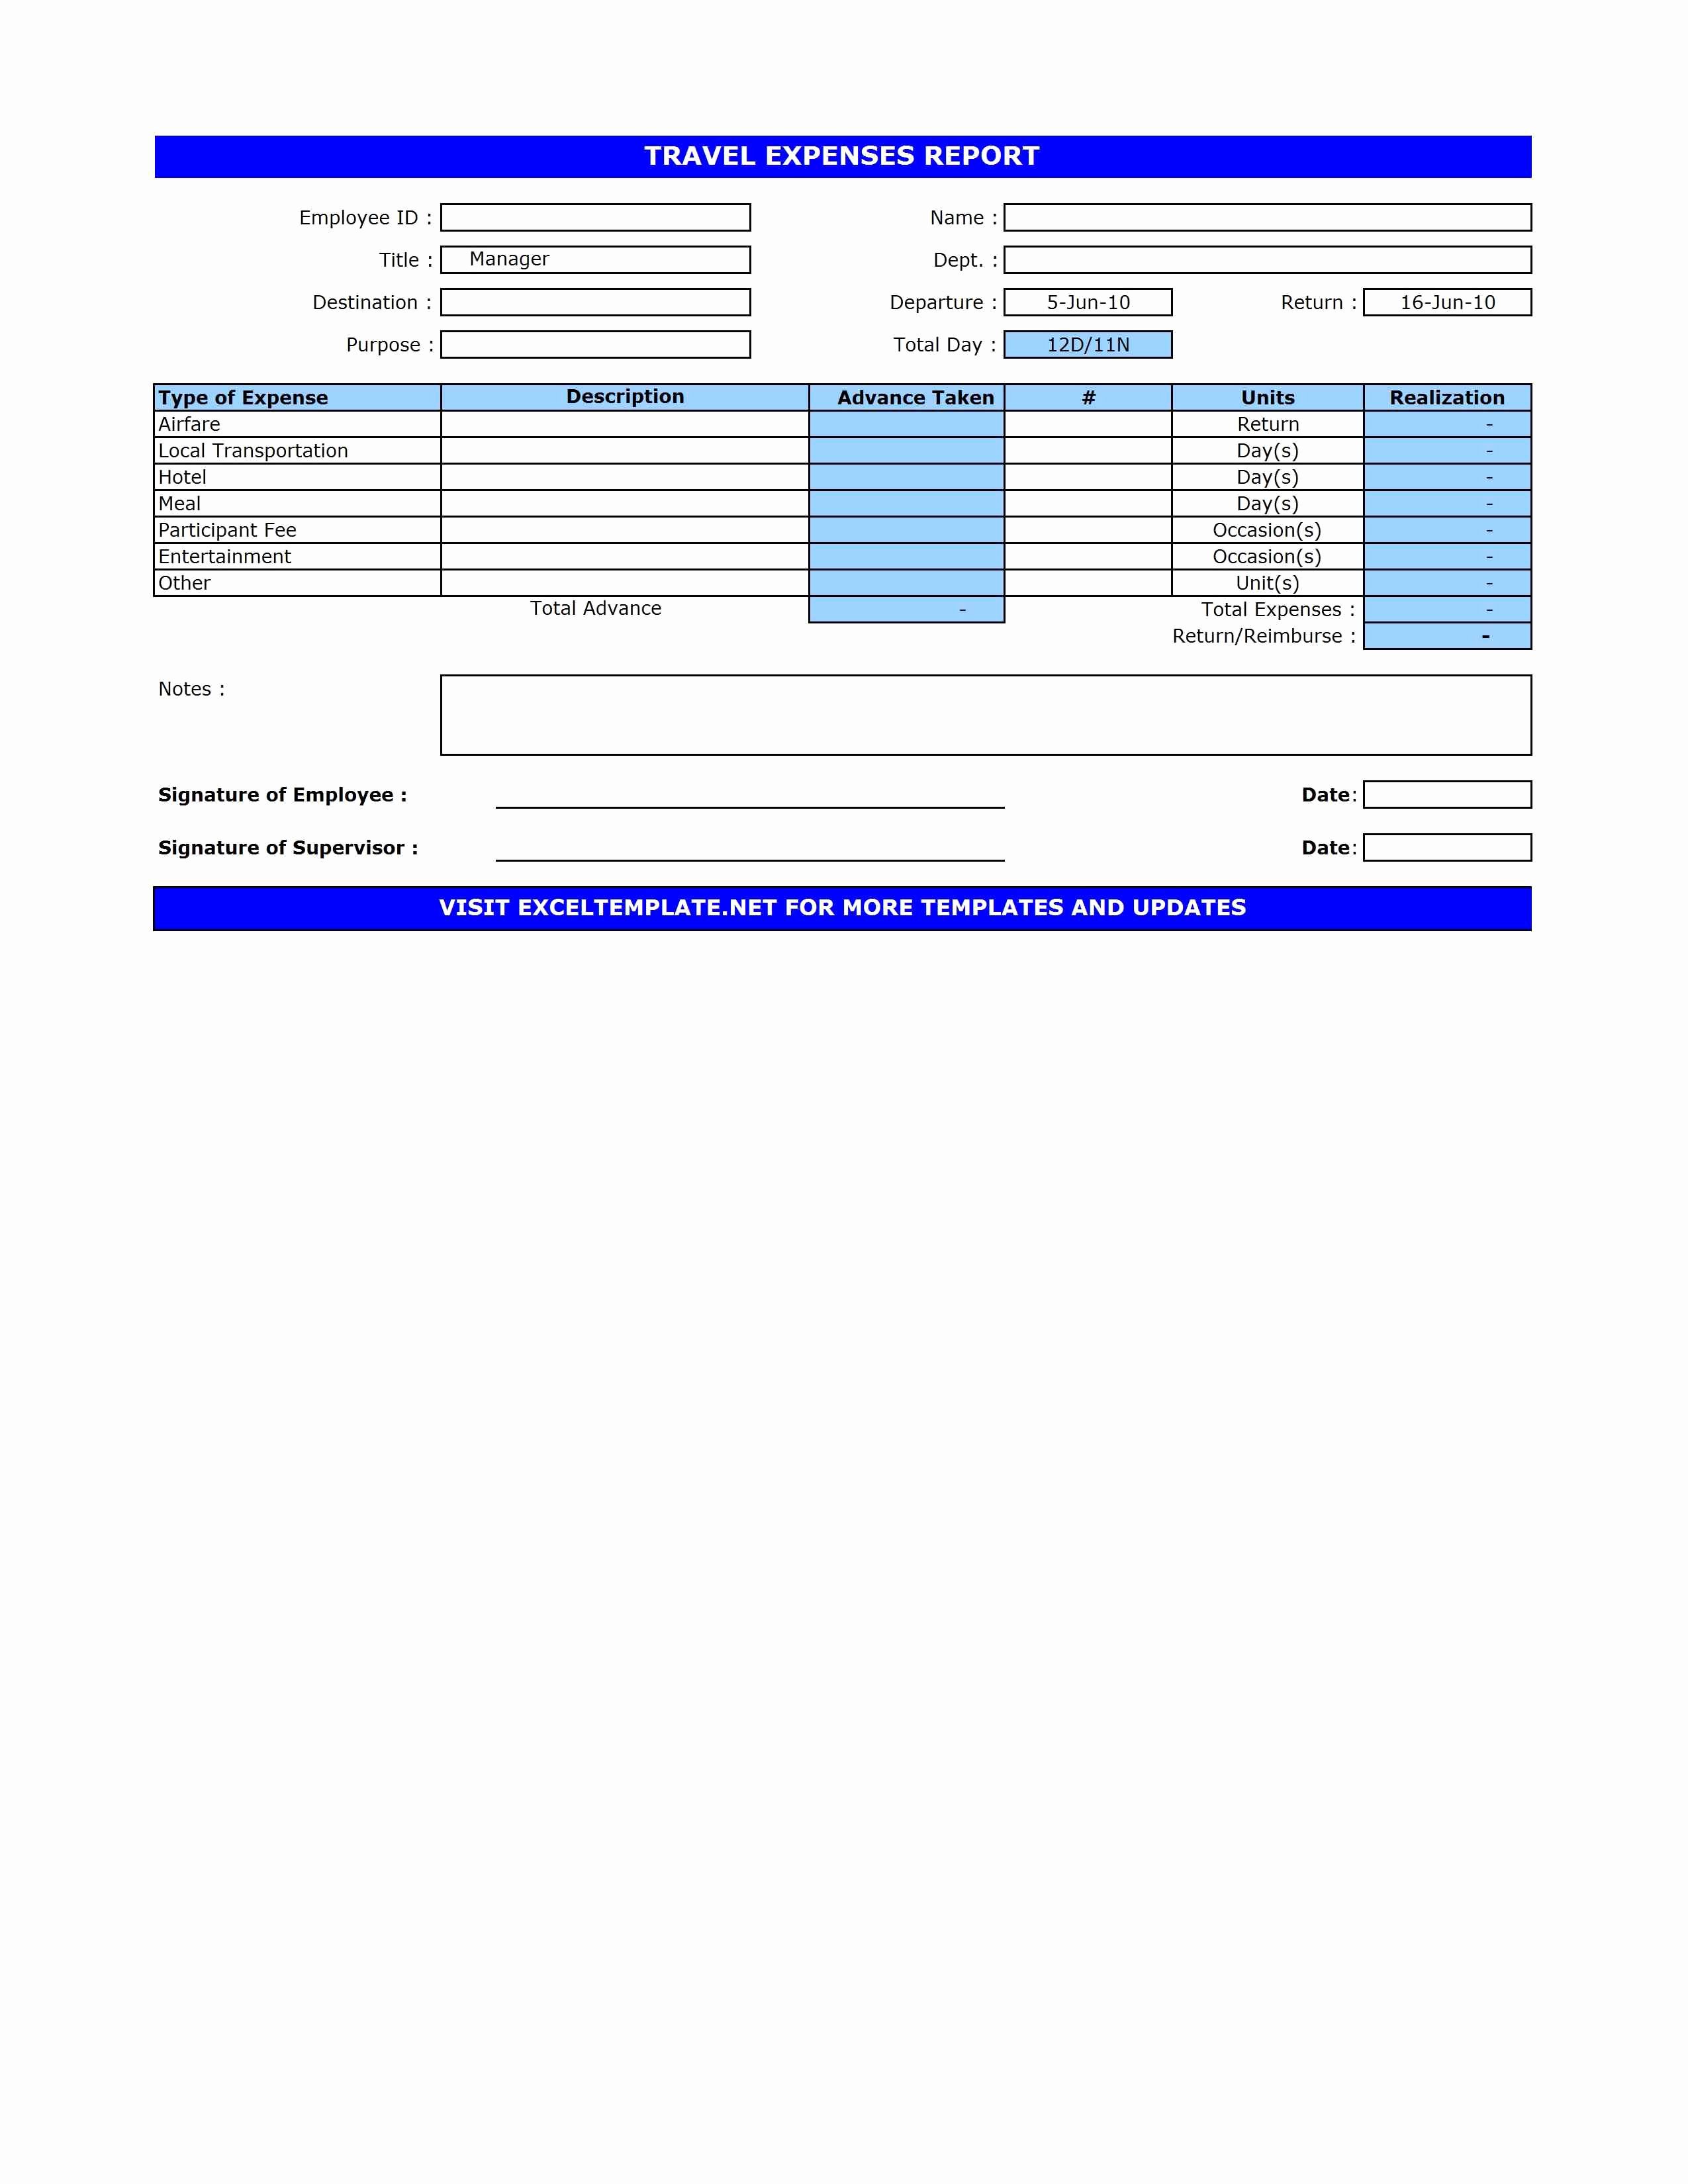 Expenses Report Template Excel Beautiful Travel Expenses Report Template